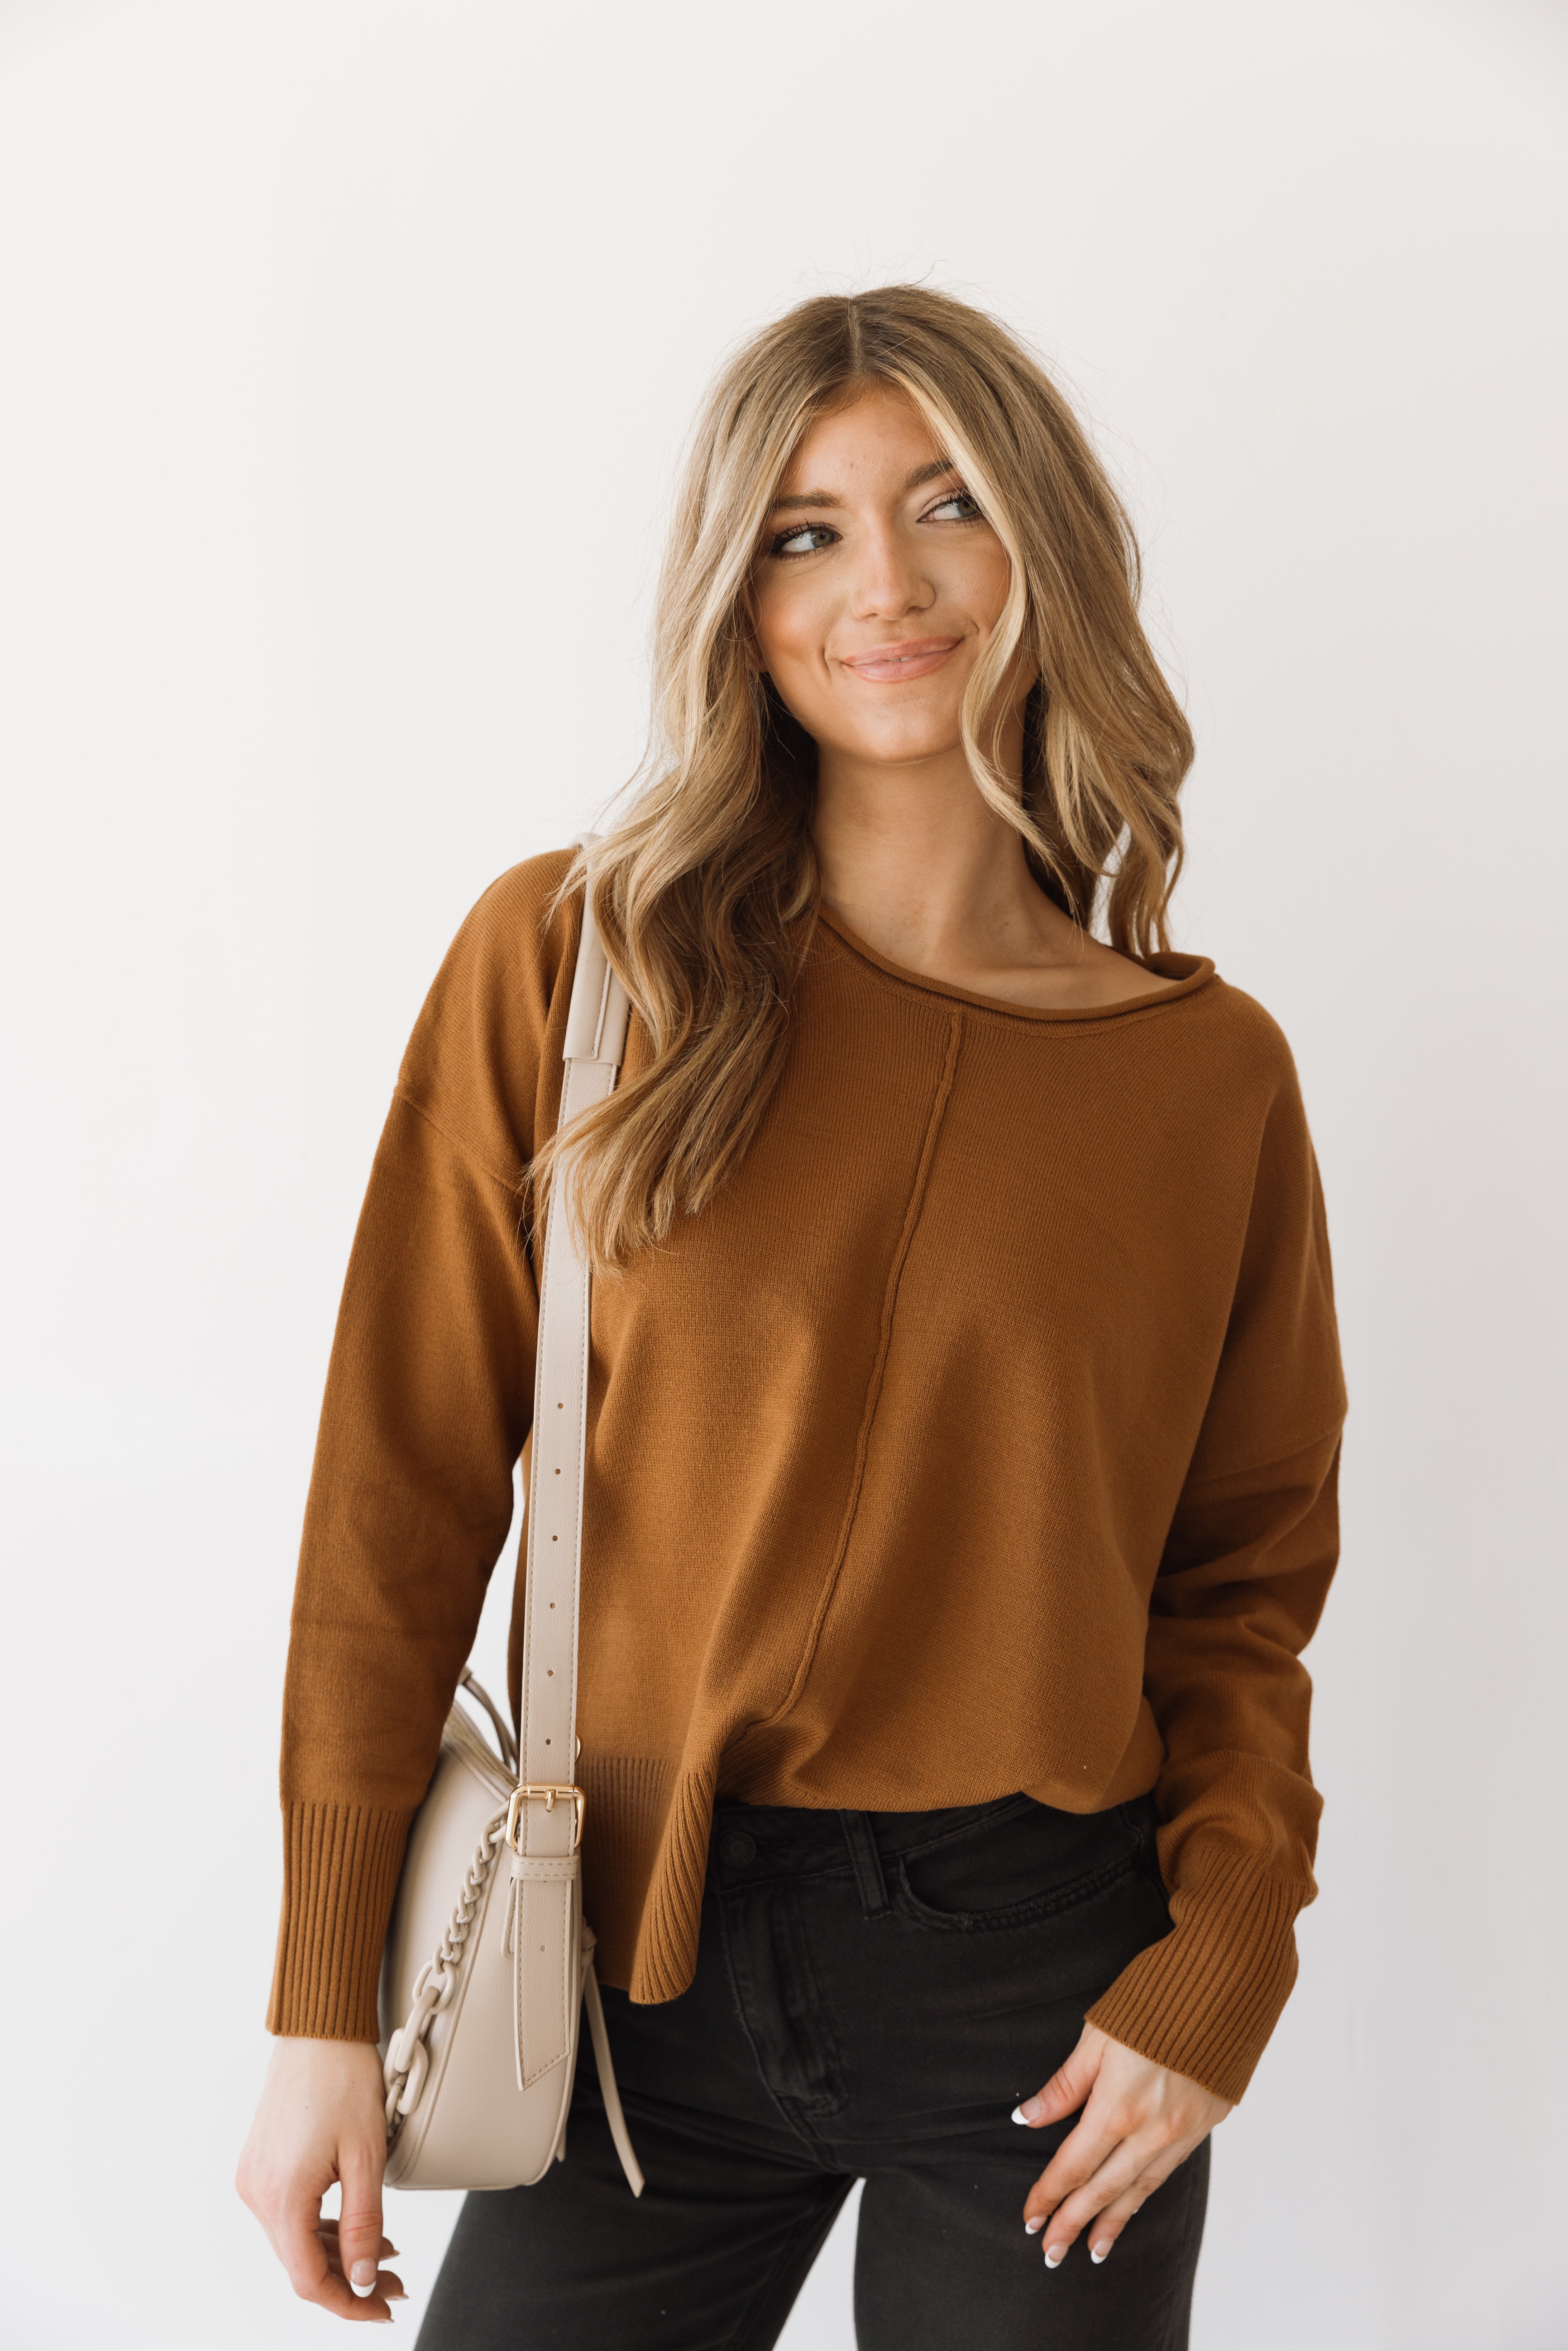 Unbothered Sweater-Brown